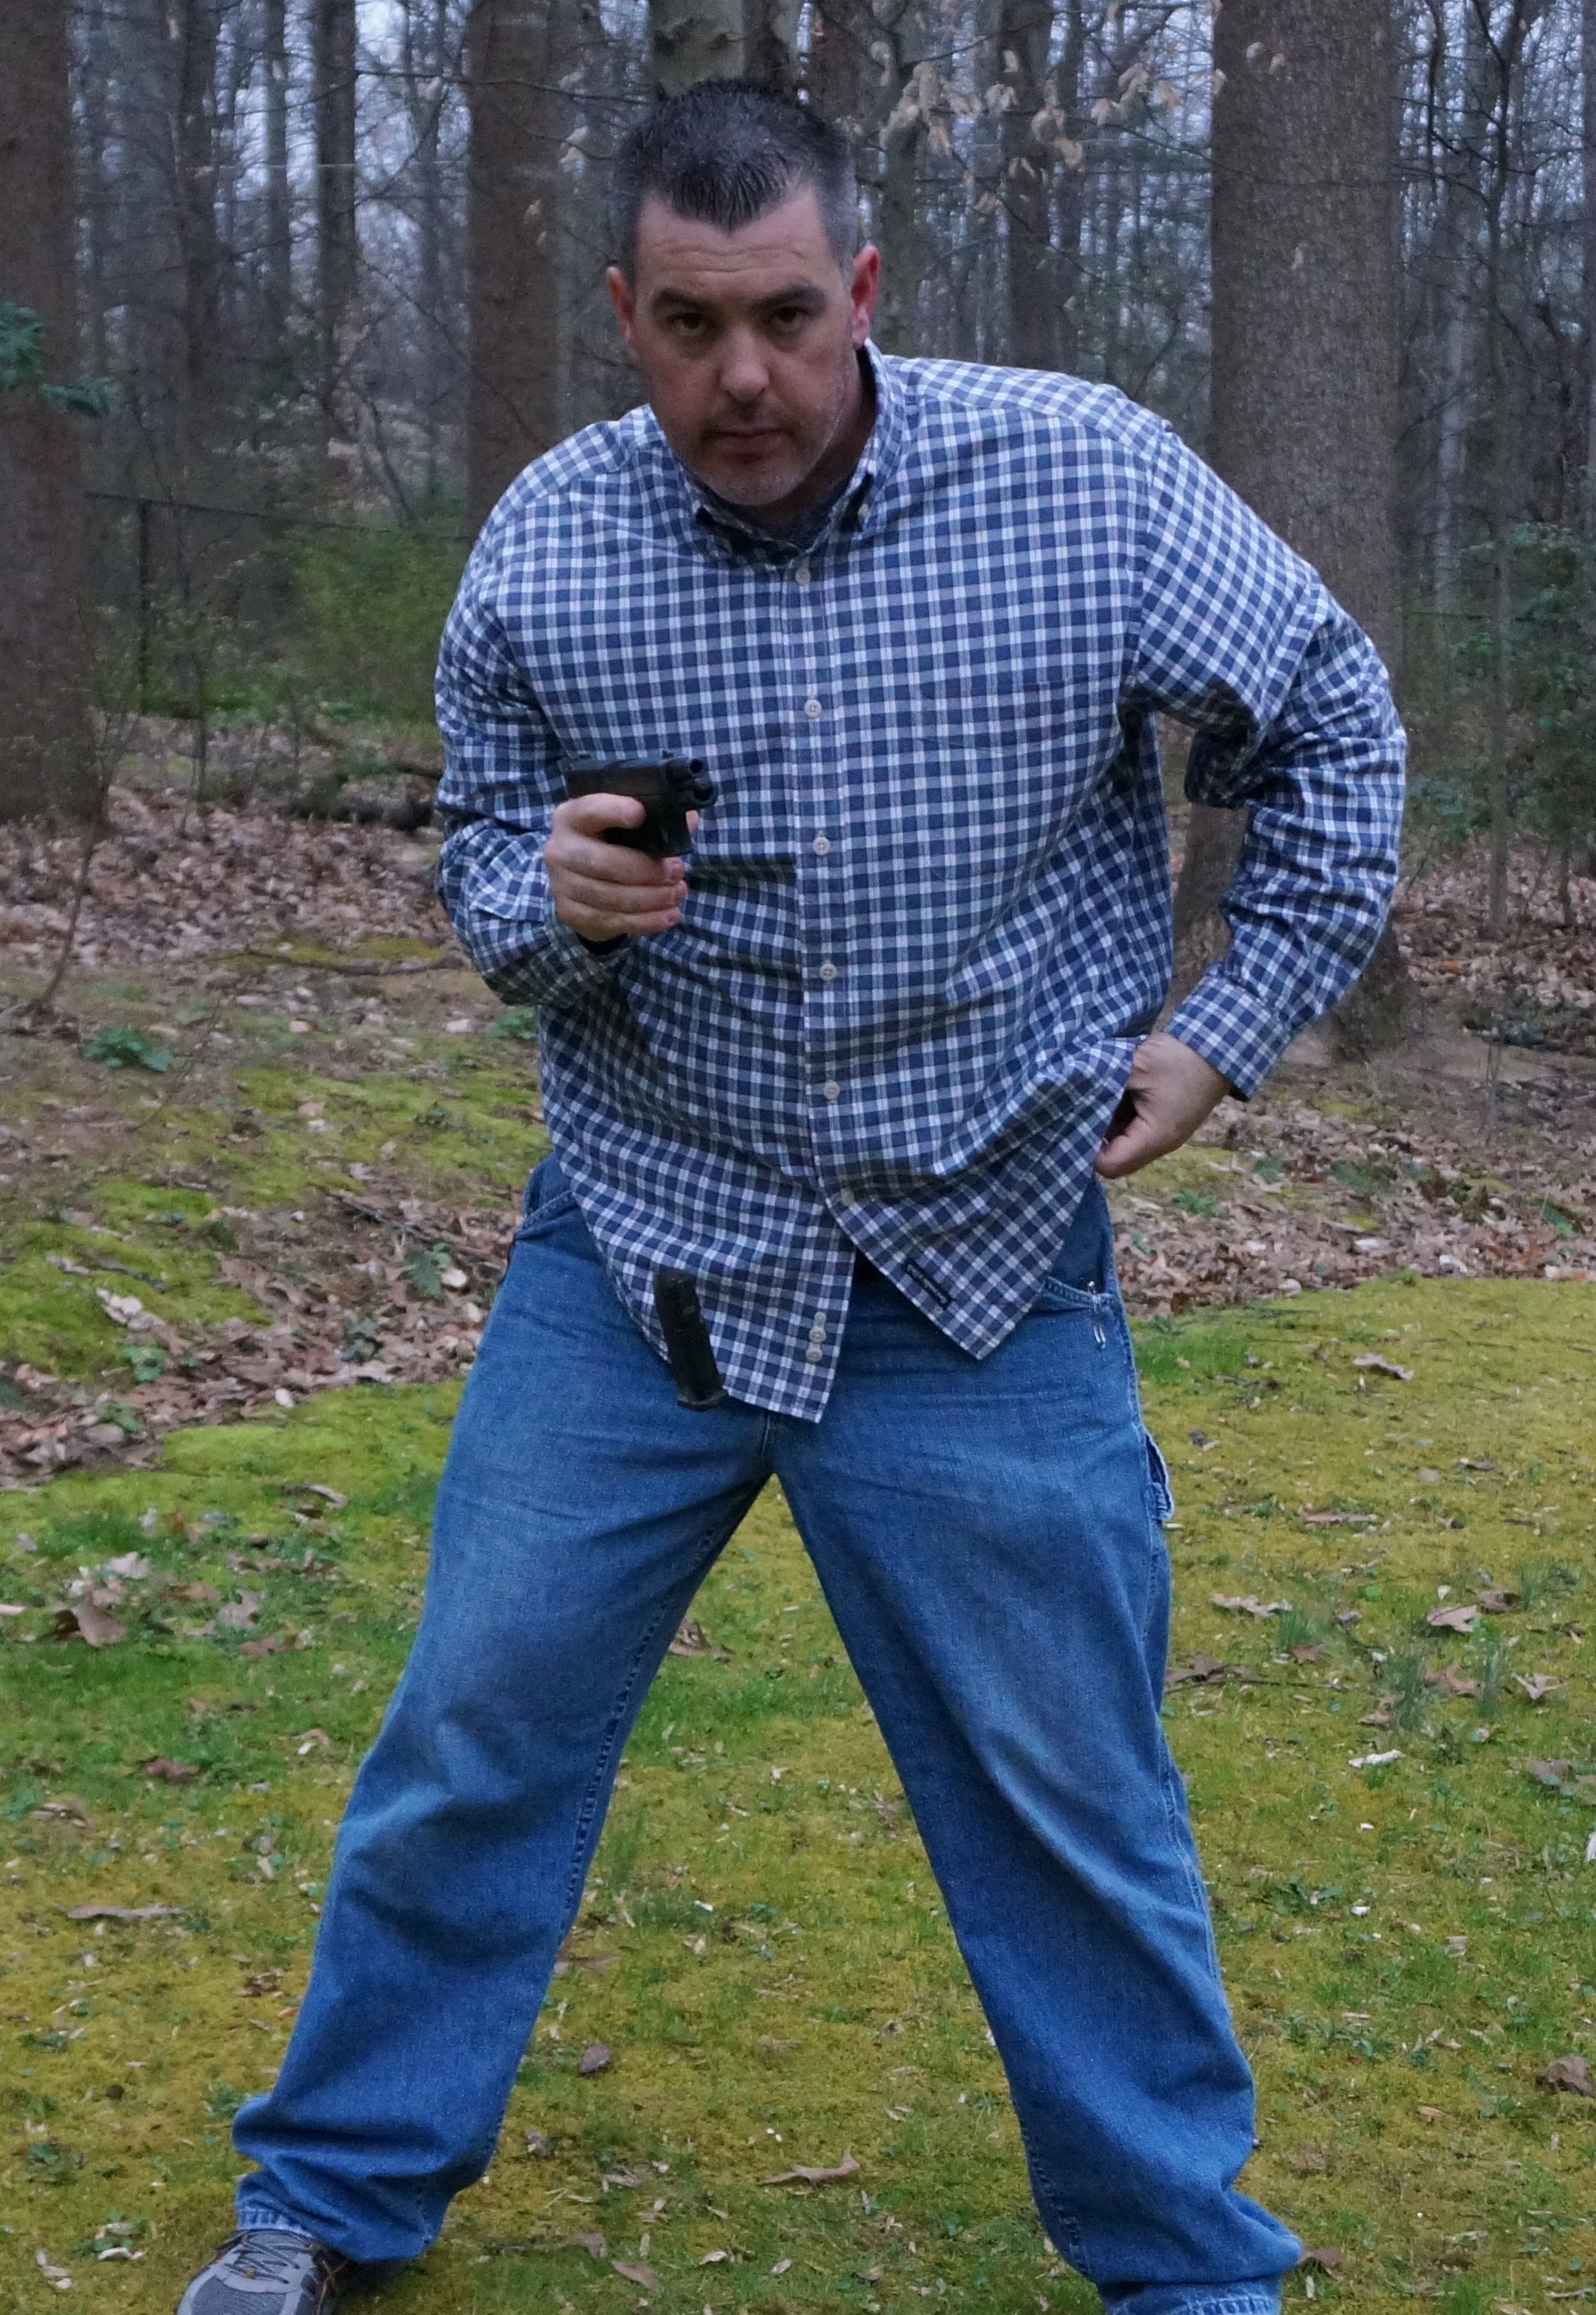 Author responds to stimulus of slide locking to the rear and has simultaneously brought gun back into high compressed work area, ejected magazine, and is reaching for a full magazine carried horizontally on his belt.  